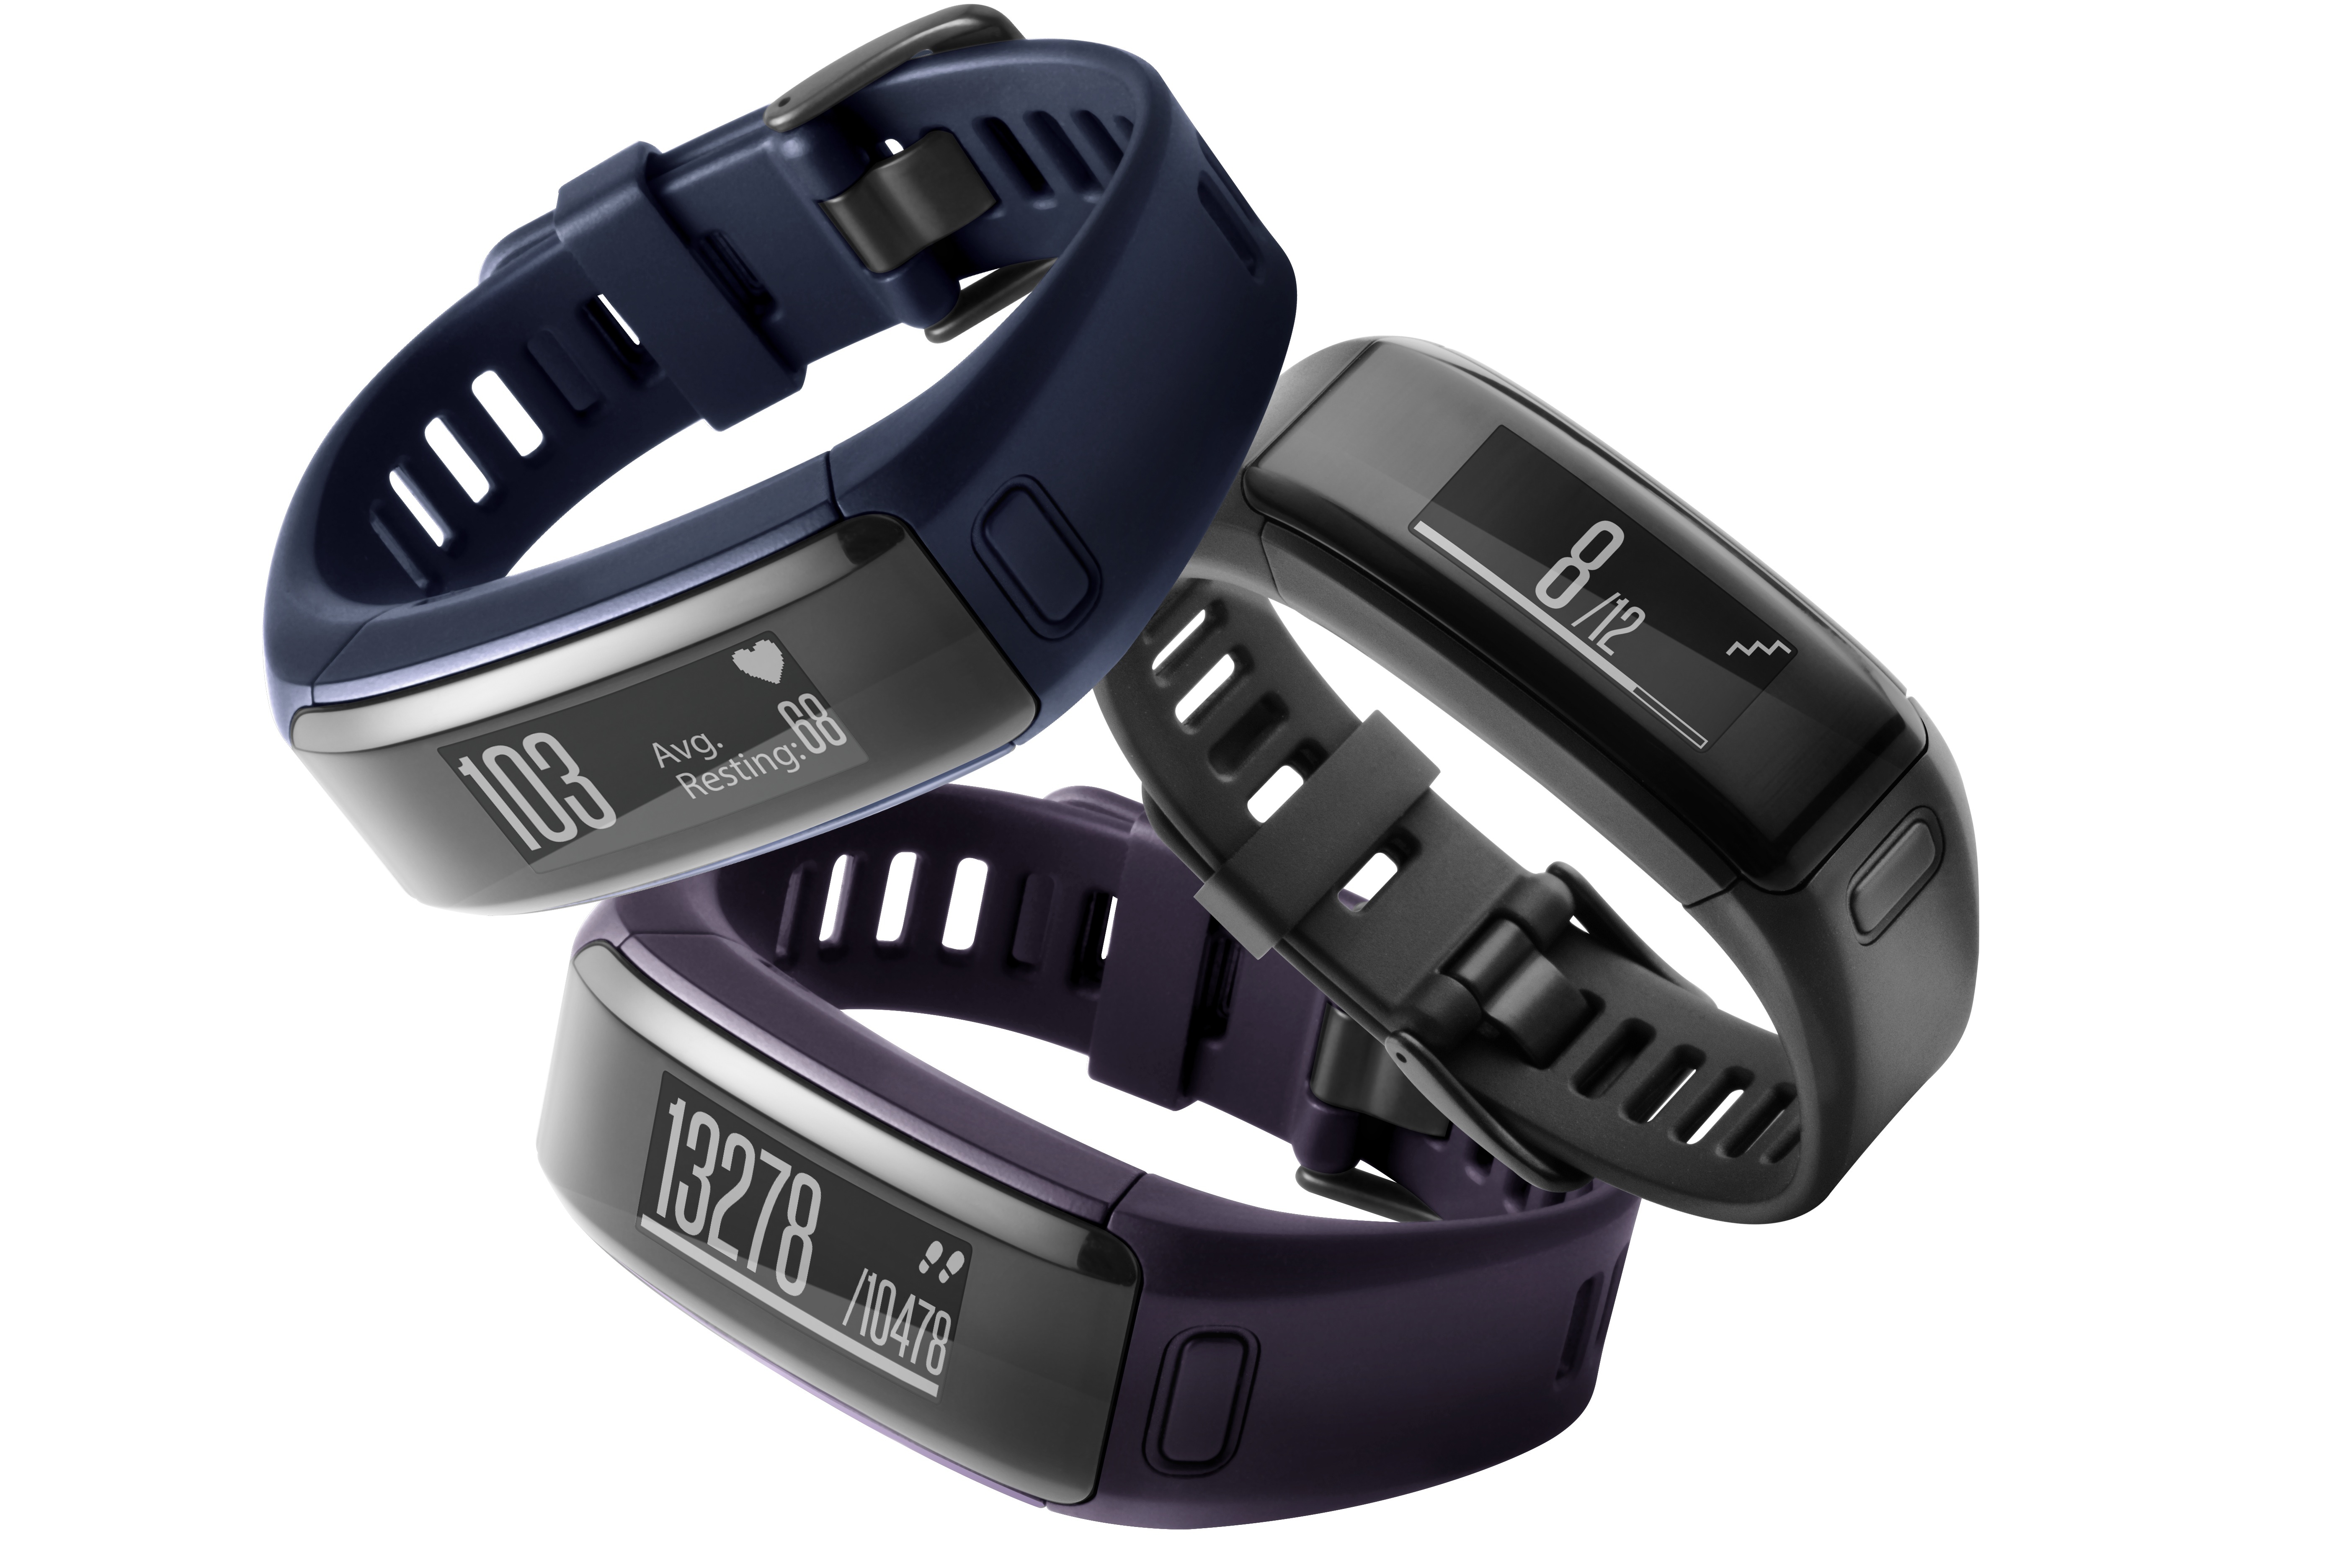 Introducing vívosmart® HR – an Activity Tracker with Wrist-Based Heart Rate  and Smart Notifications from Garmin®